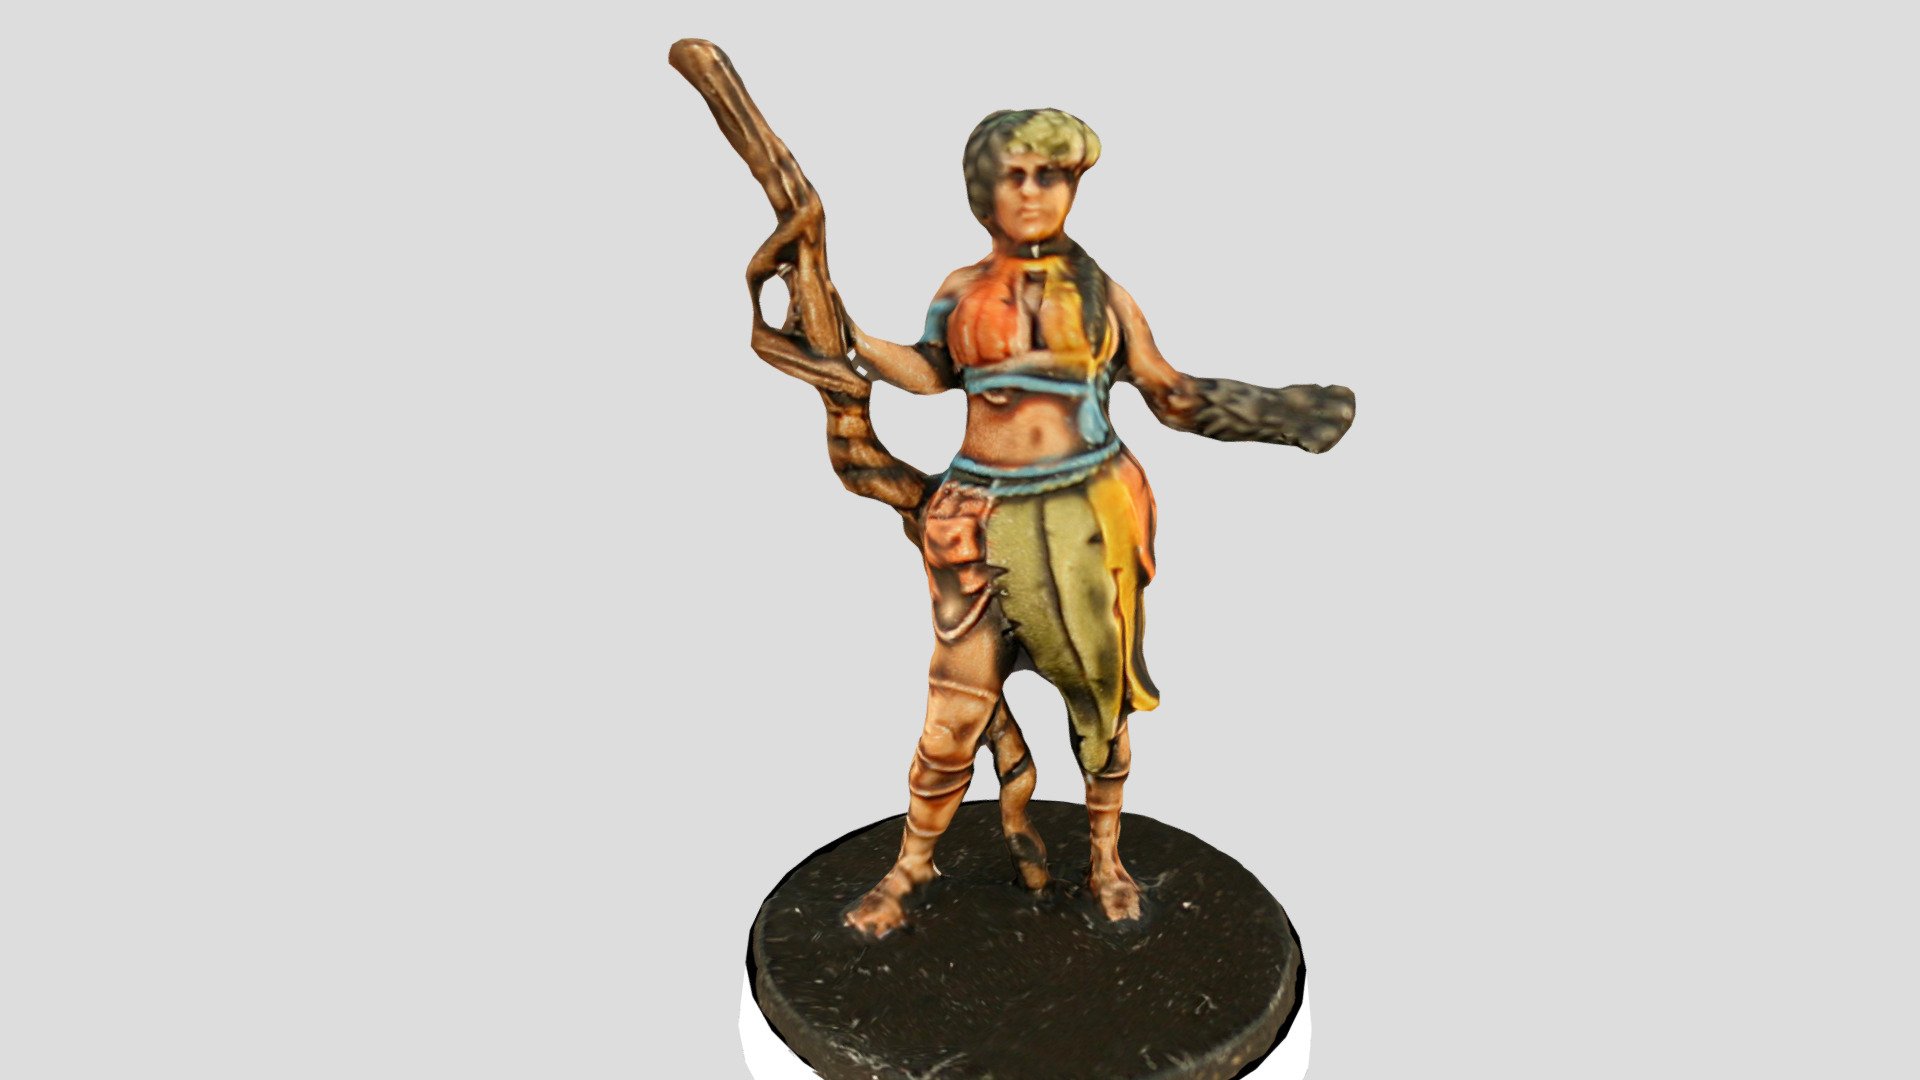 Is based on the HeroQuest Mythic druid hero 3d model